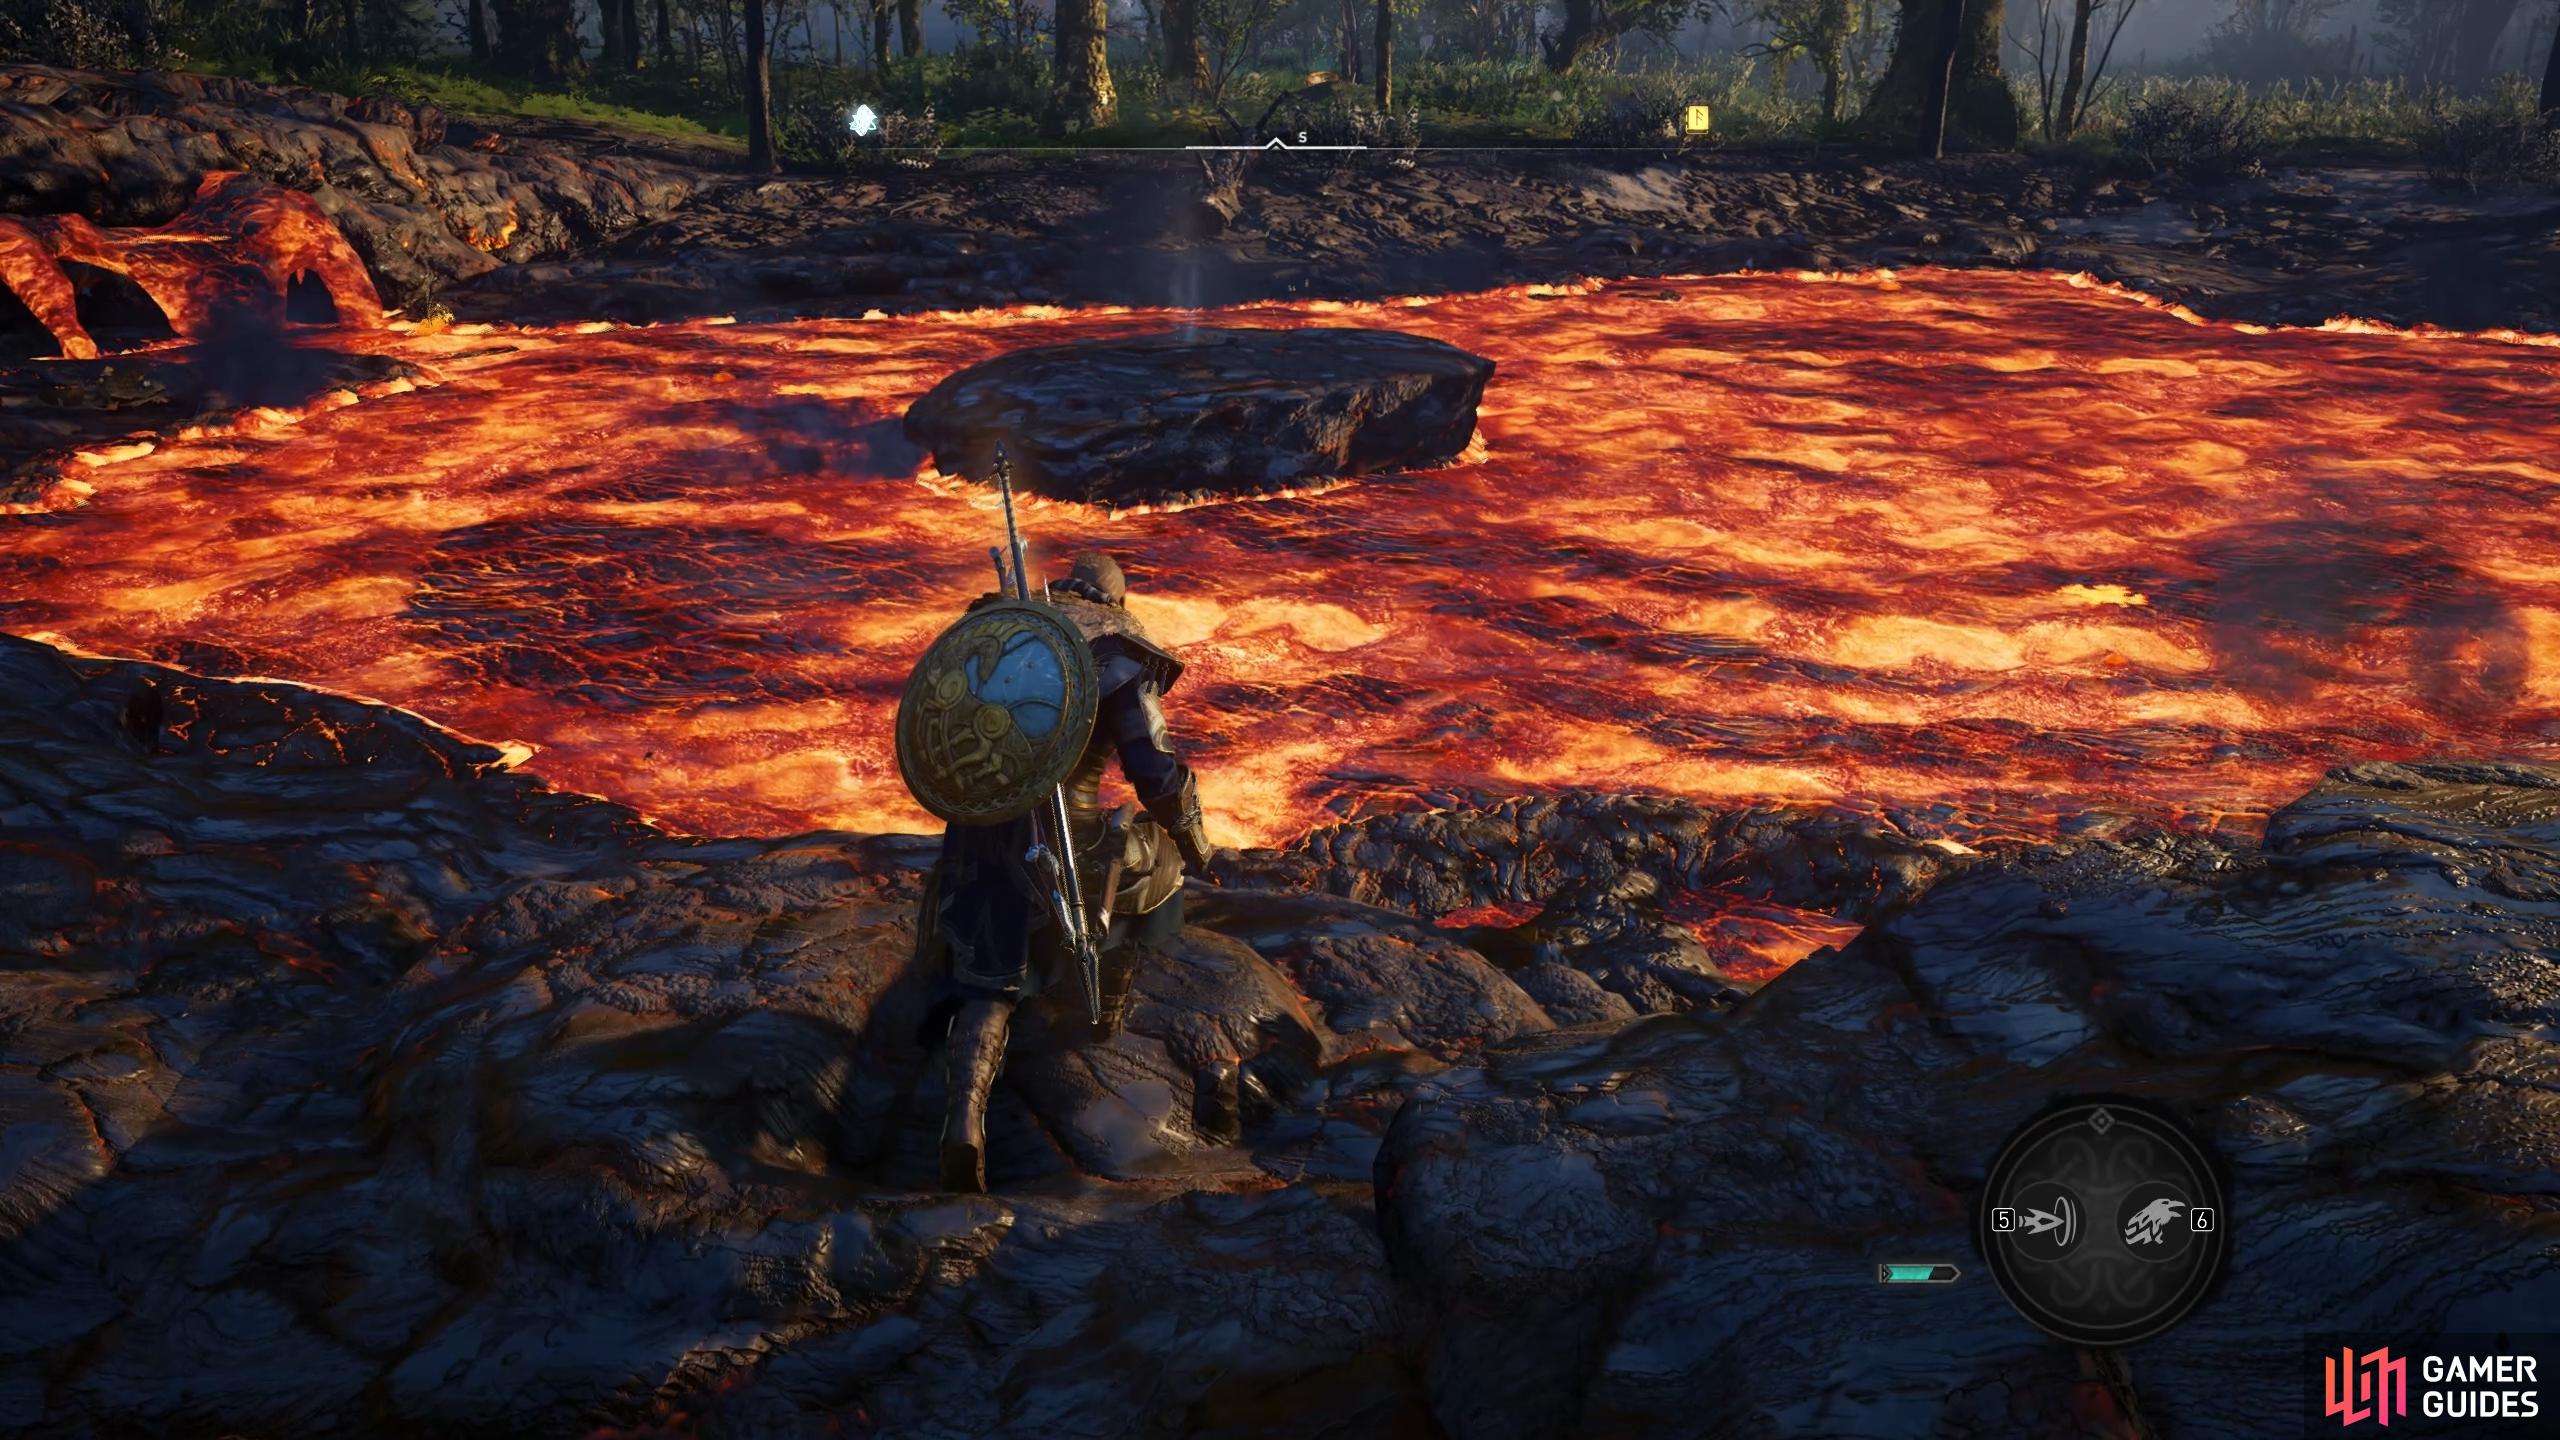 You'll need to obtain the hammer from the centre of the lava pit.